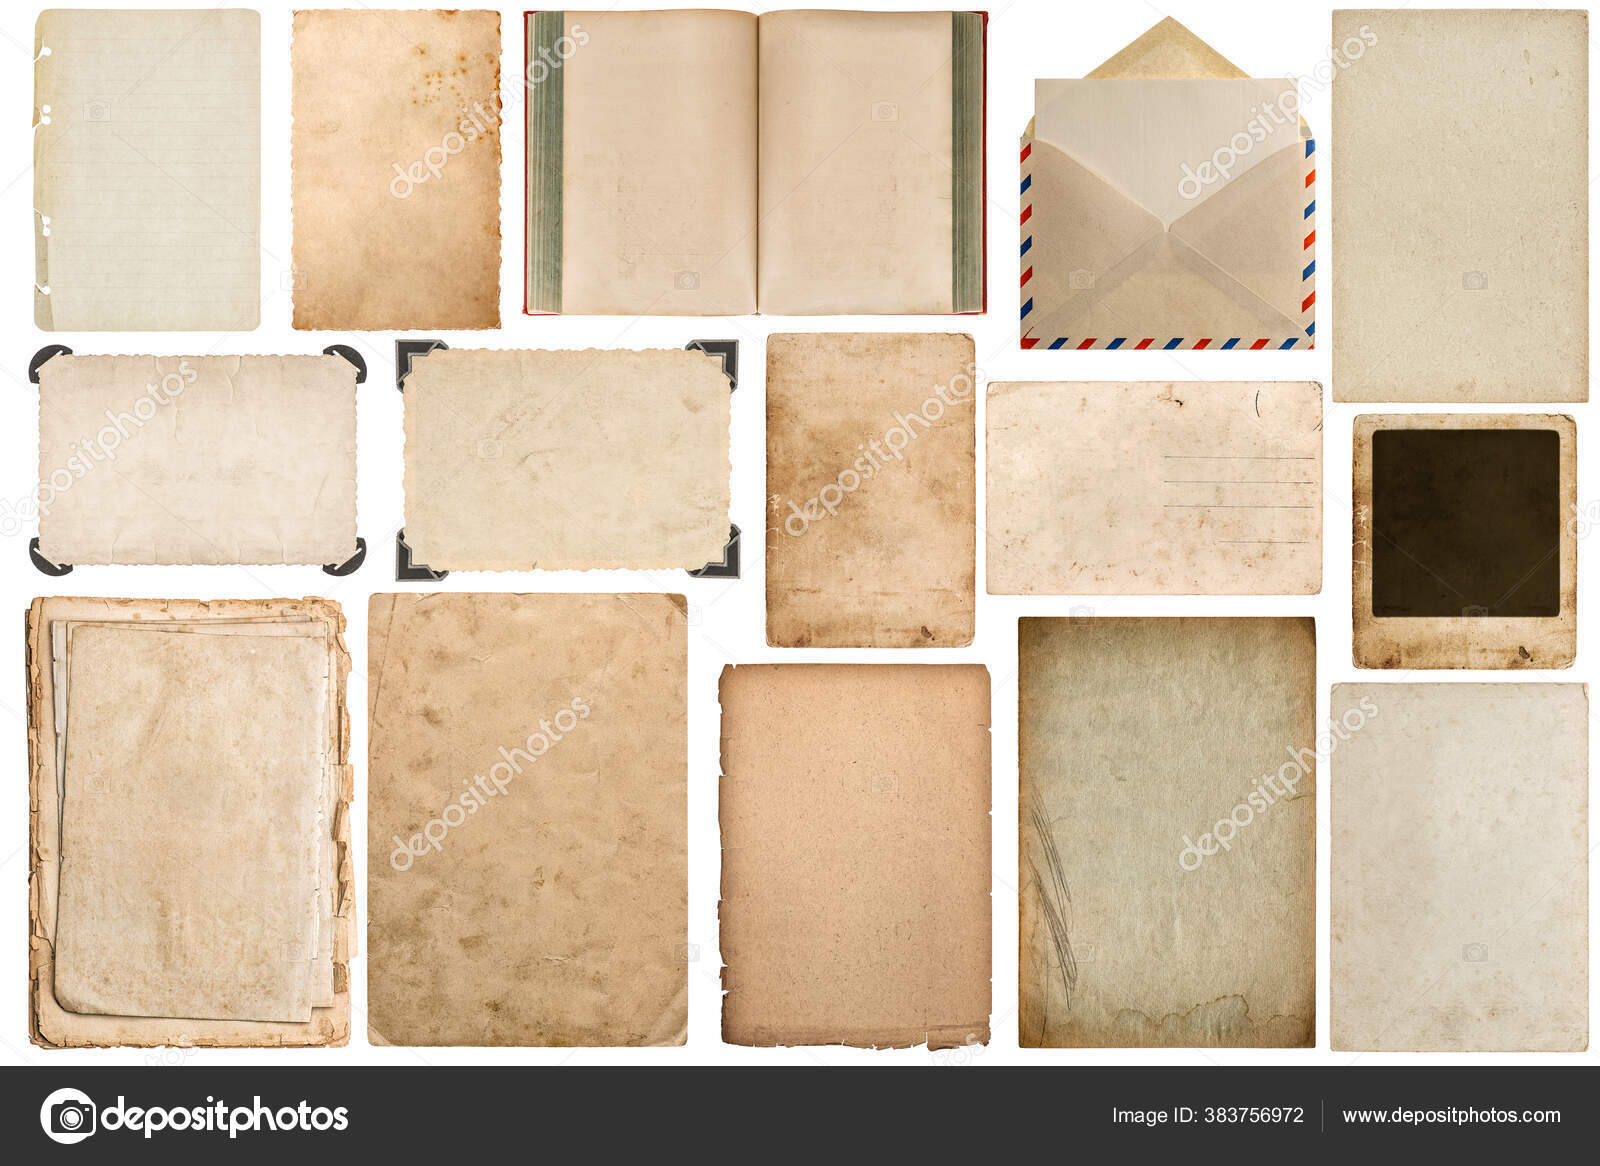 Antique book page. Old paper sheet isolated on white background